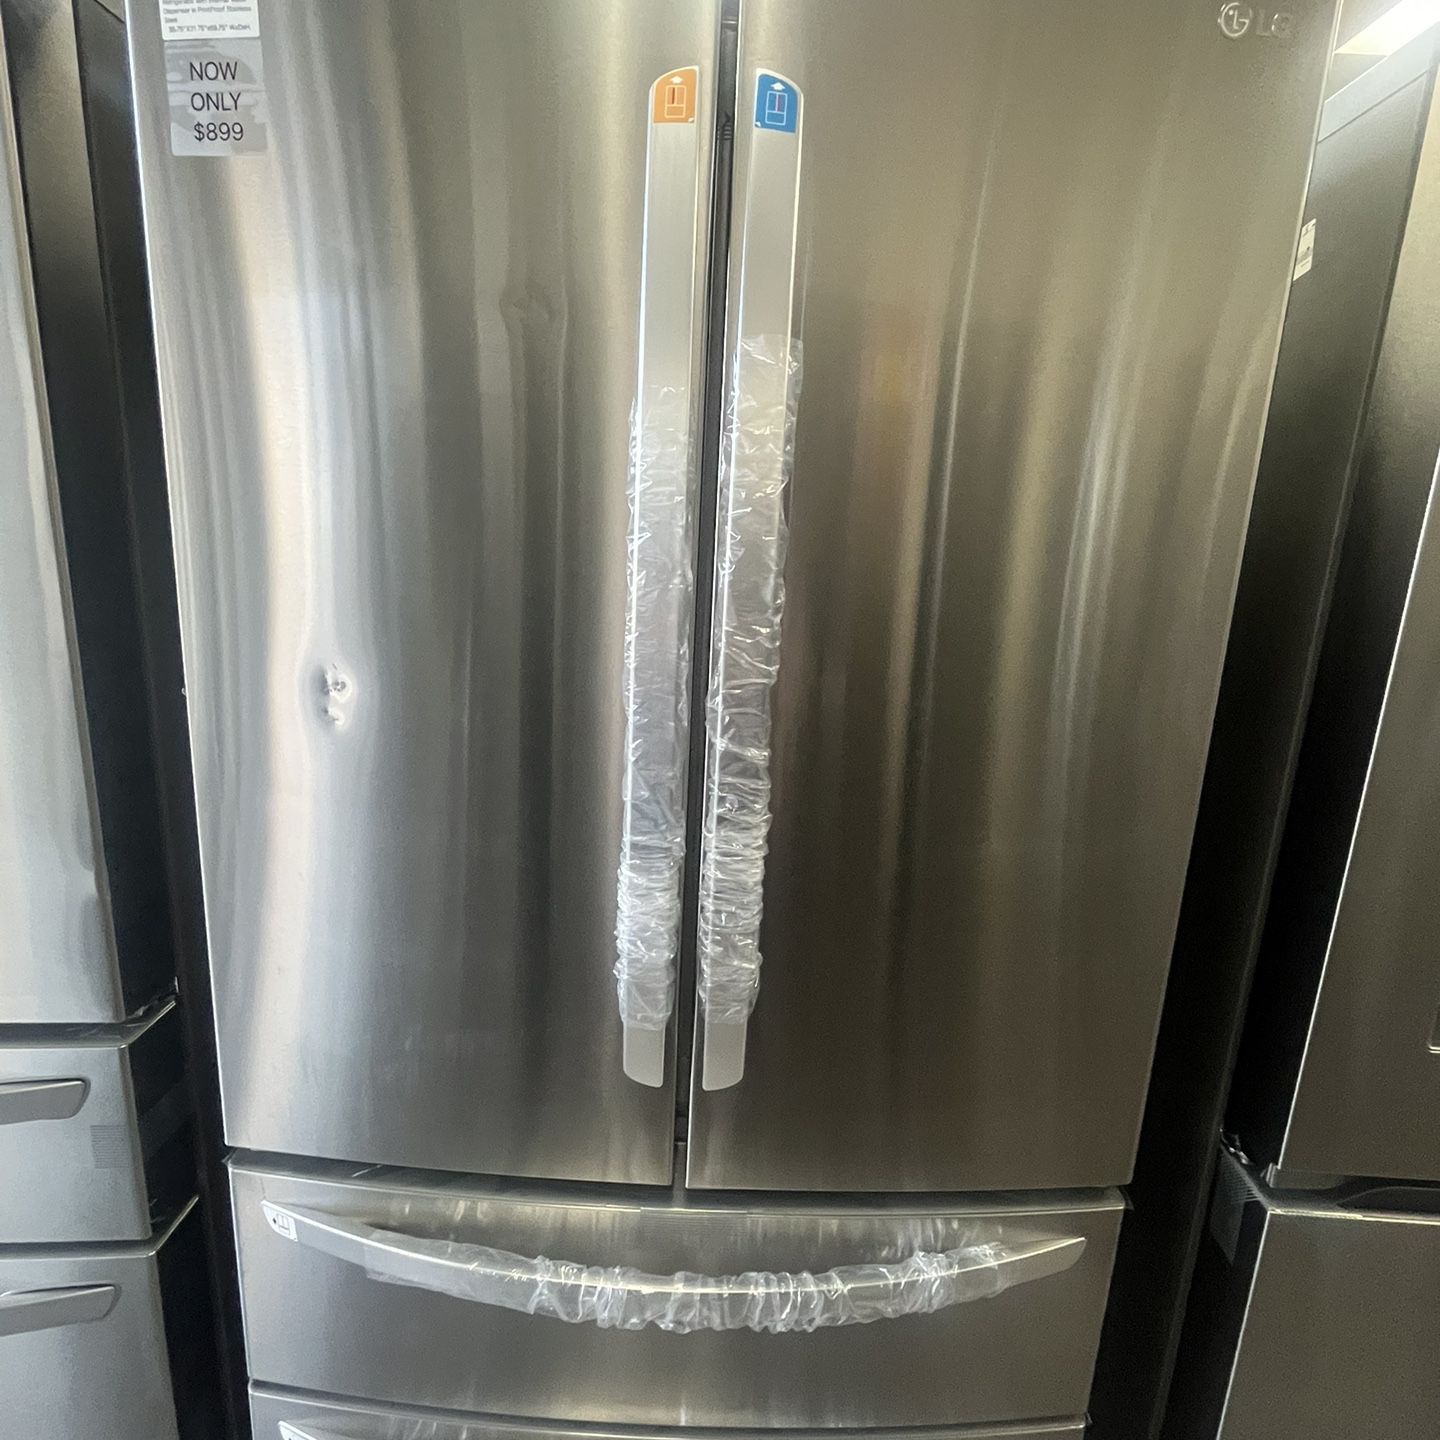 Clearance Sale/ Up To 65%OFF  4 Door Fridge On Sale WAS$2399 NOW$899